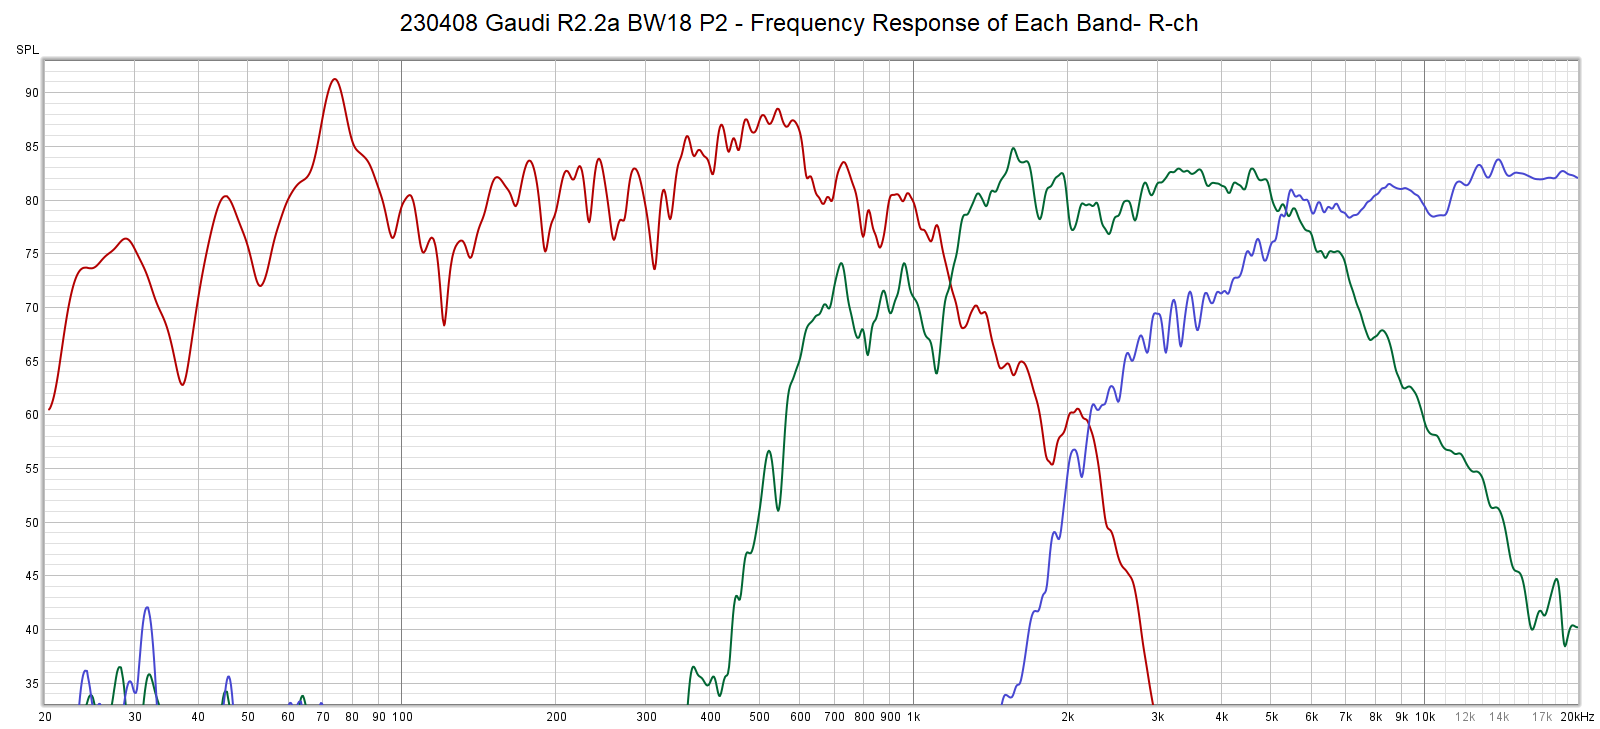 ED3402＋H4401 Frequency Response - Each Band